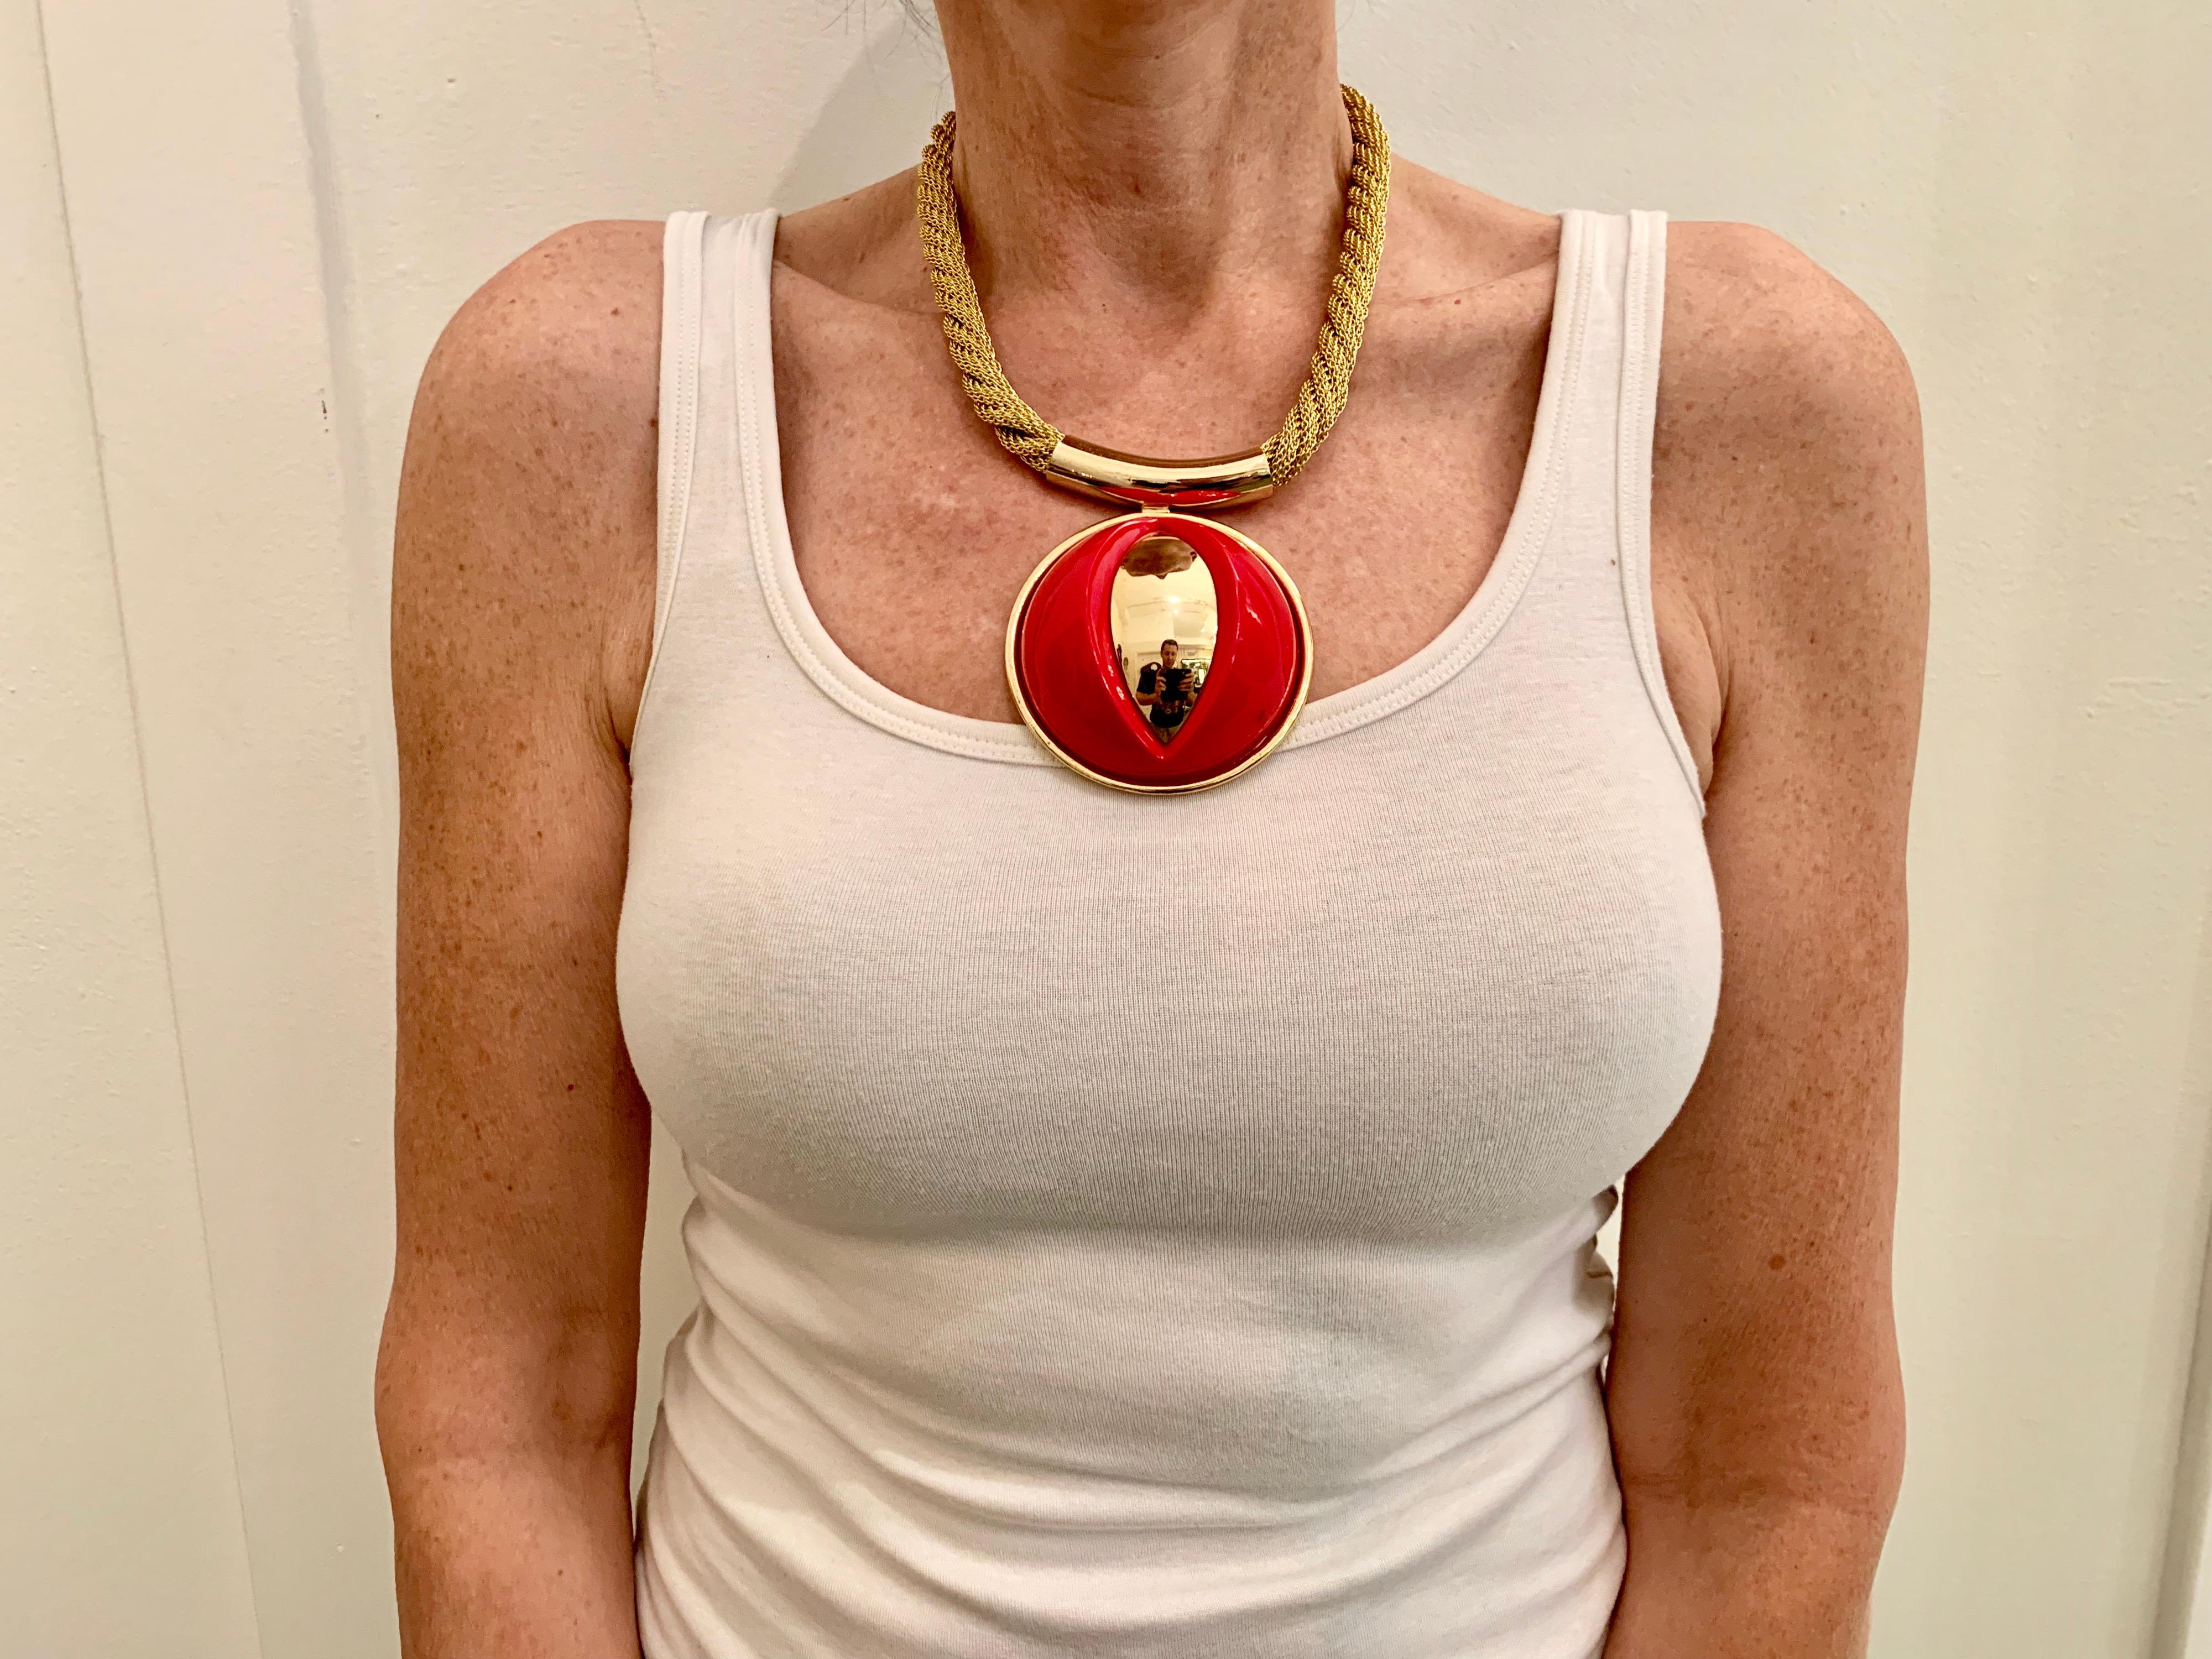 Vintage Lanvin Paris contemporary modern statement pendant necklace, made in France circa 1970 - the large statement necklace is comprised out of a thick gold-tone rope mesh chain, which is adorned by a large architectural circular resin pendant